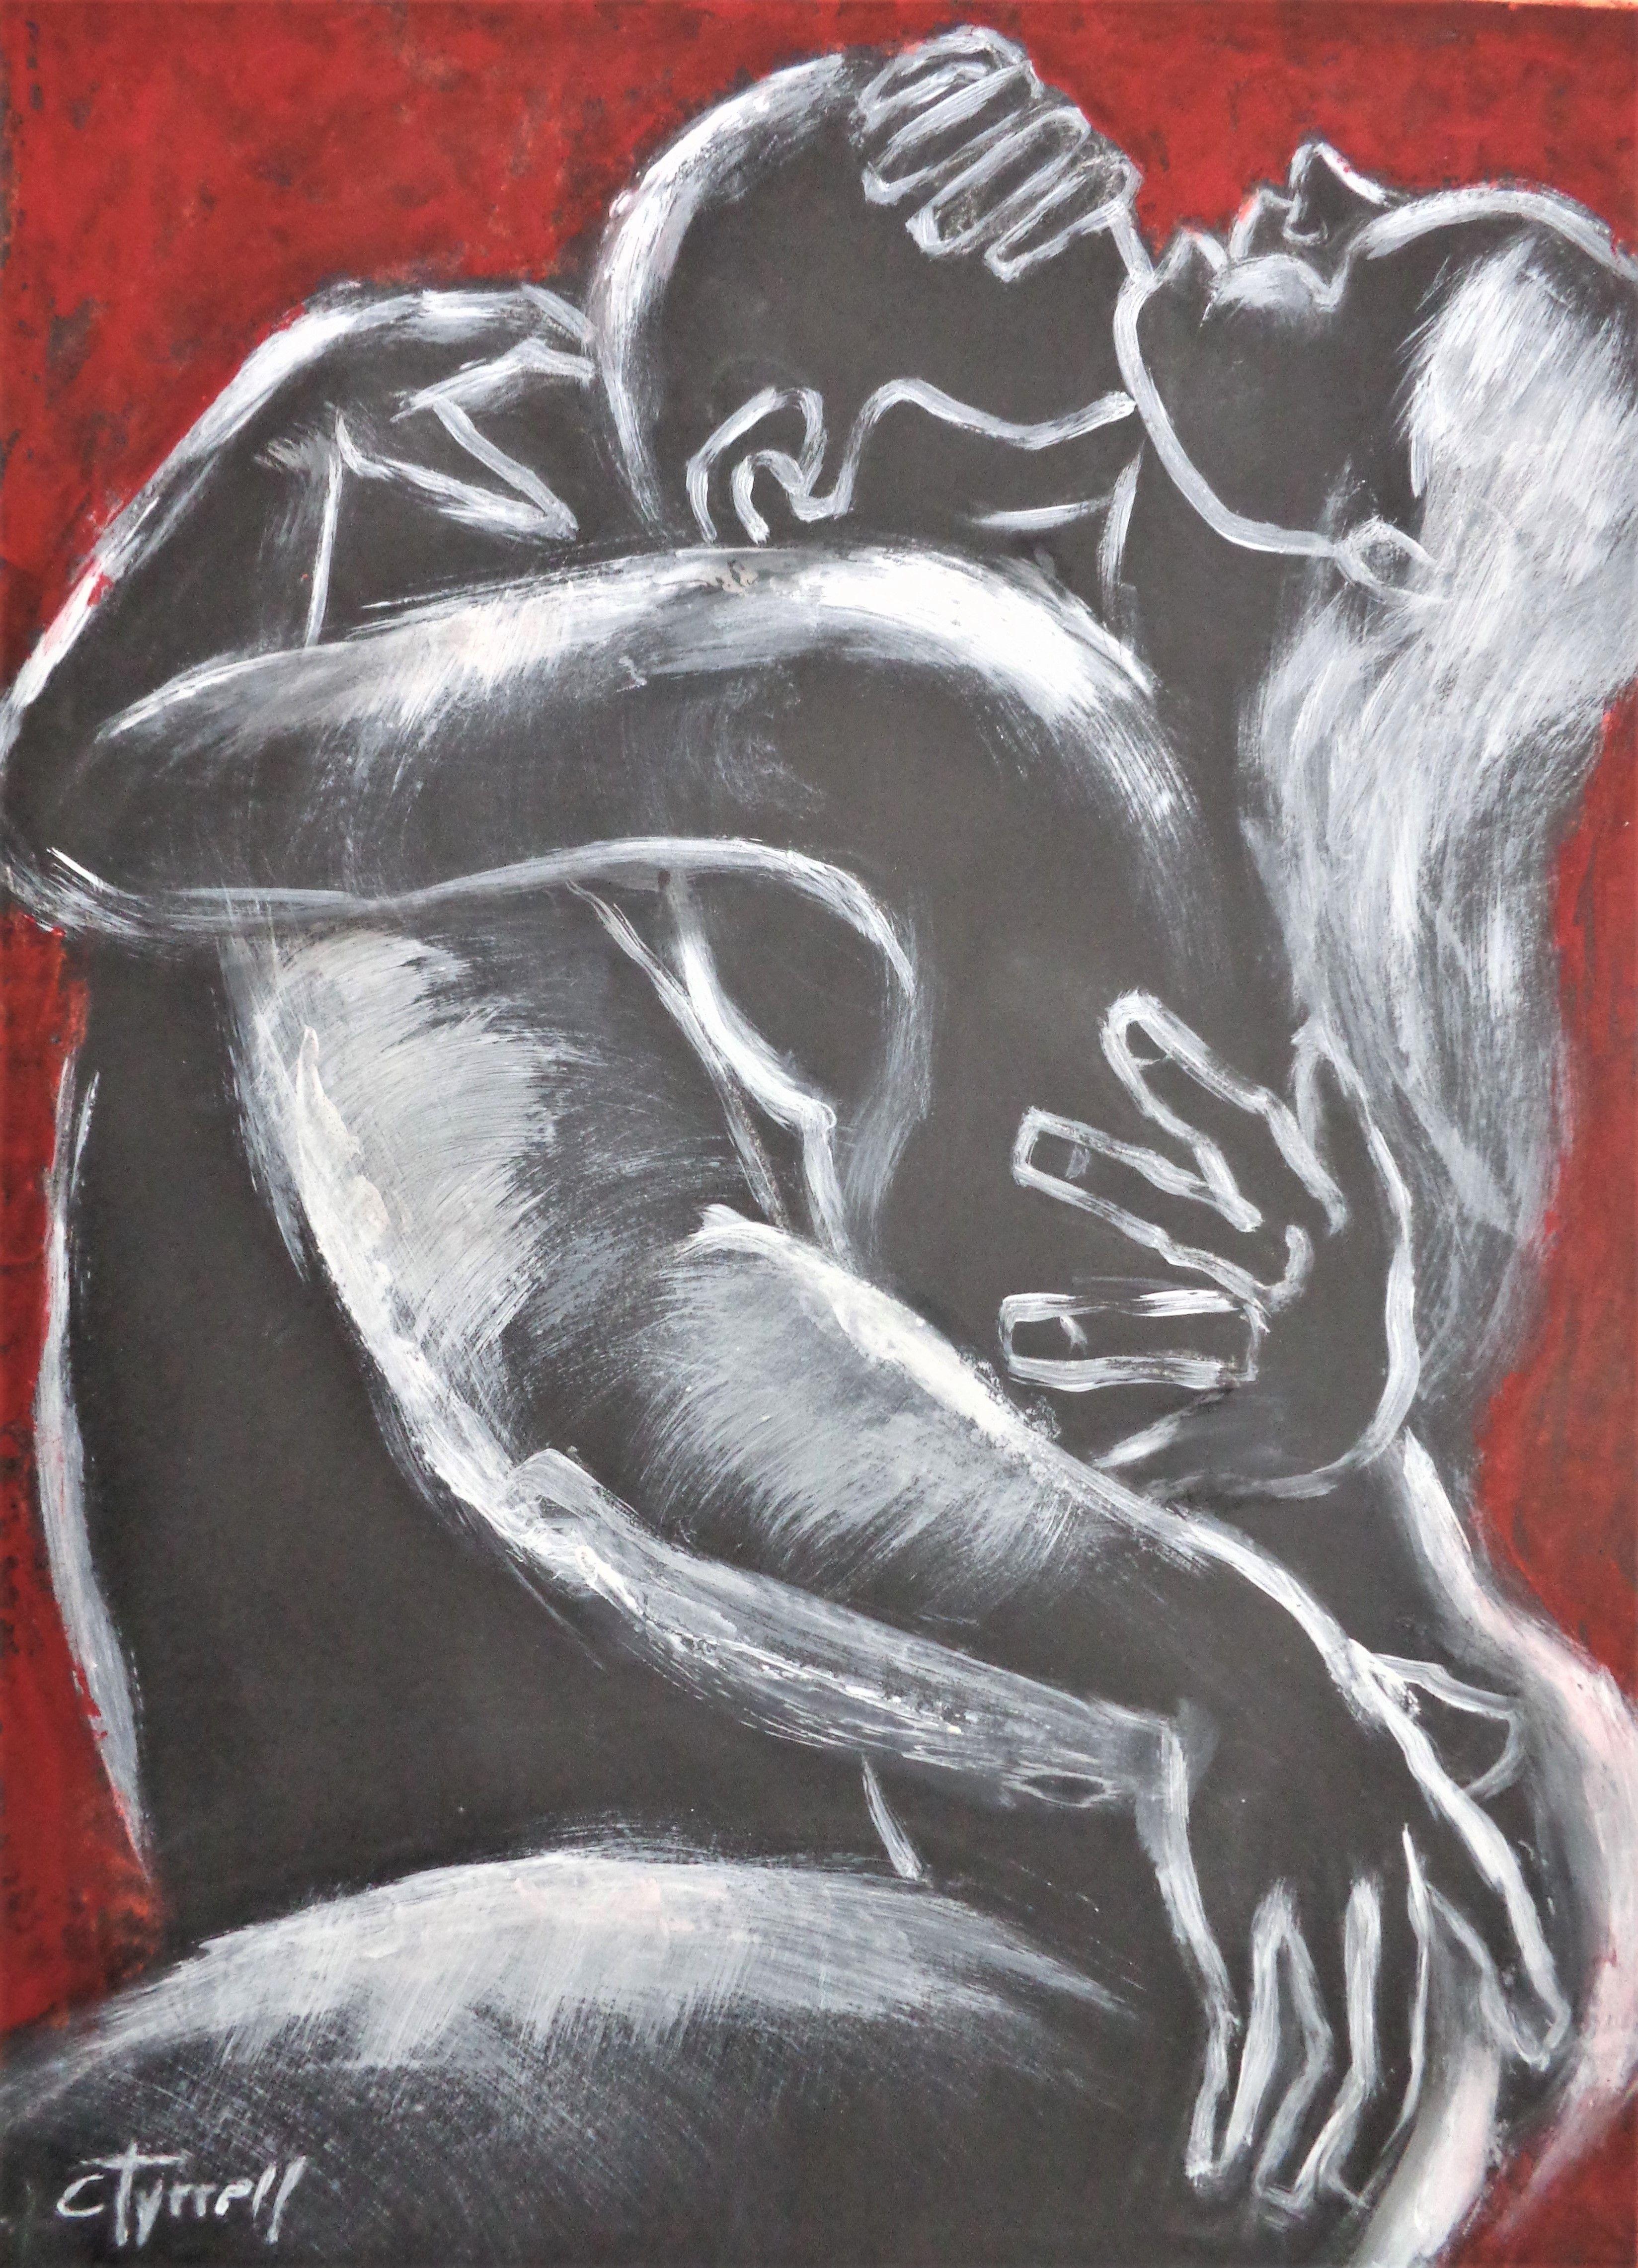 Original contemporary figurative painting, unframed. White and red acrylics on black paper. Part of a new series of erotic and sensual drawings of passionate lovers. Size 59 cm x 84 cm (23.5" x 33"). Certificate of Authenticity. Deliver